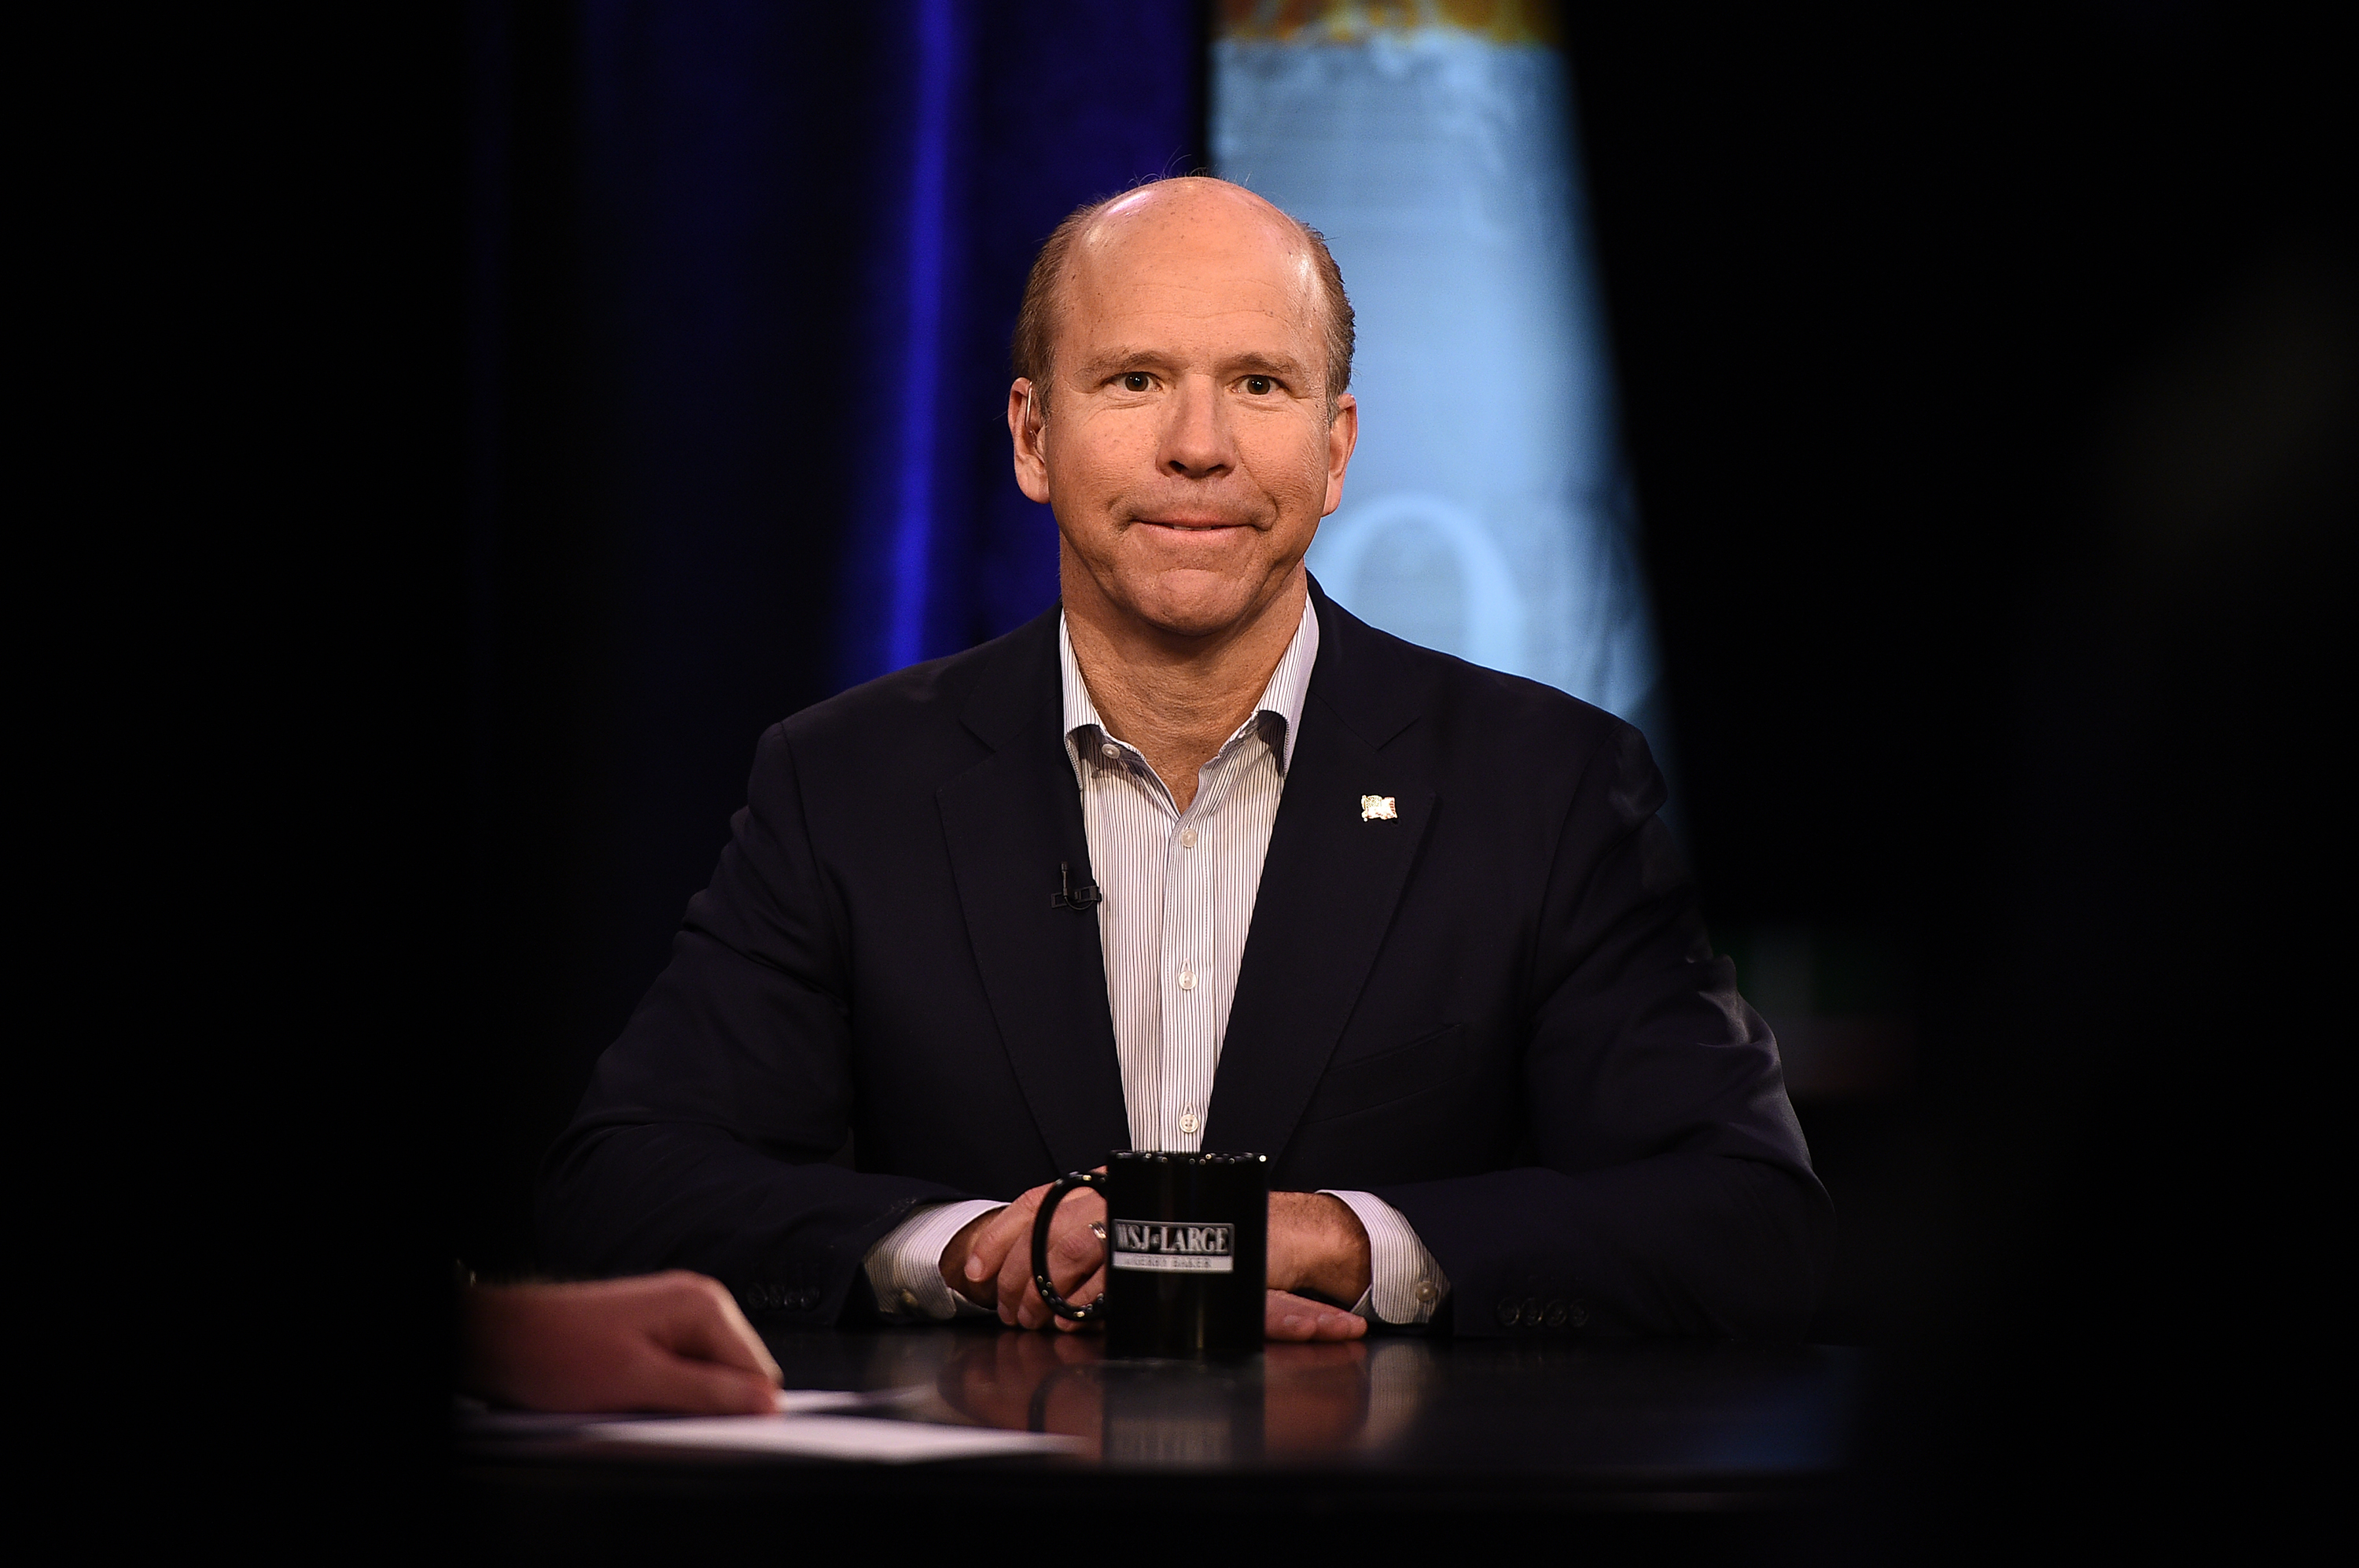 Presidential candidate John Delaney attends a taping of "WSJ At Large with Gerry Baker" (which will air Friday, March 29th) at Fox Business Network Studios on March 27, 2019 in New York City. (Theo Wargo—Getty Images)